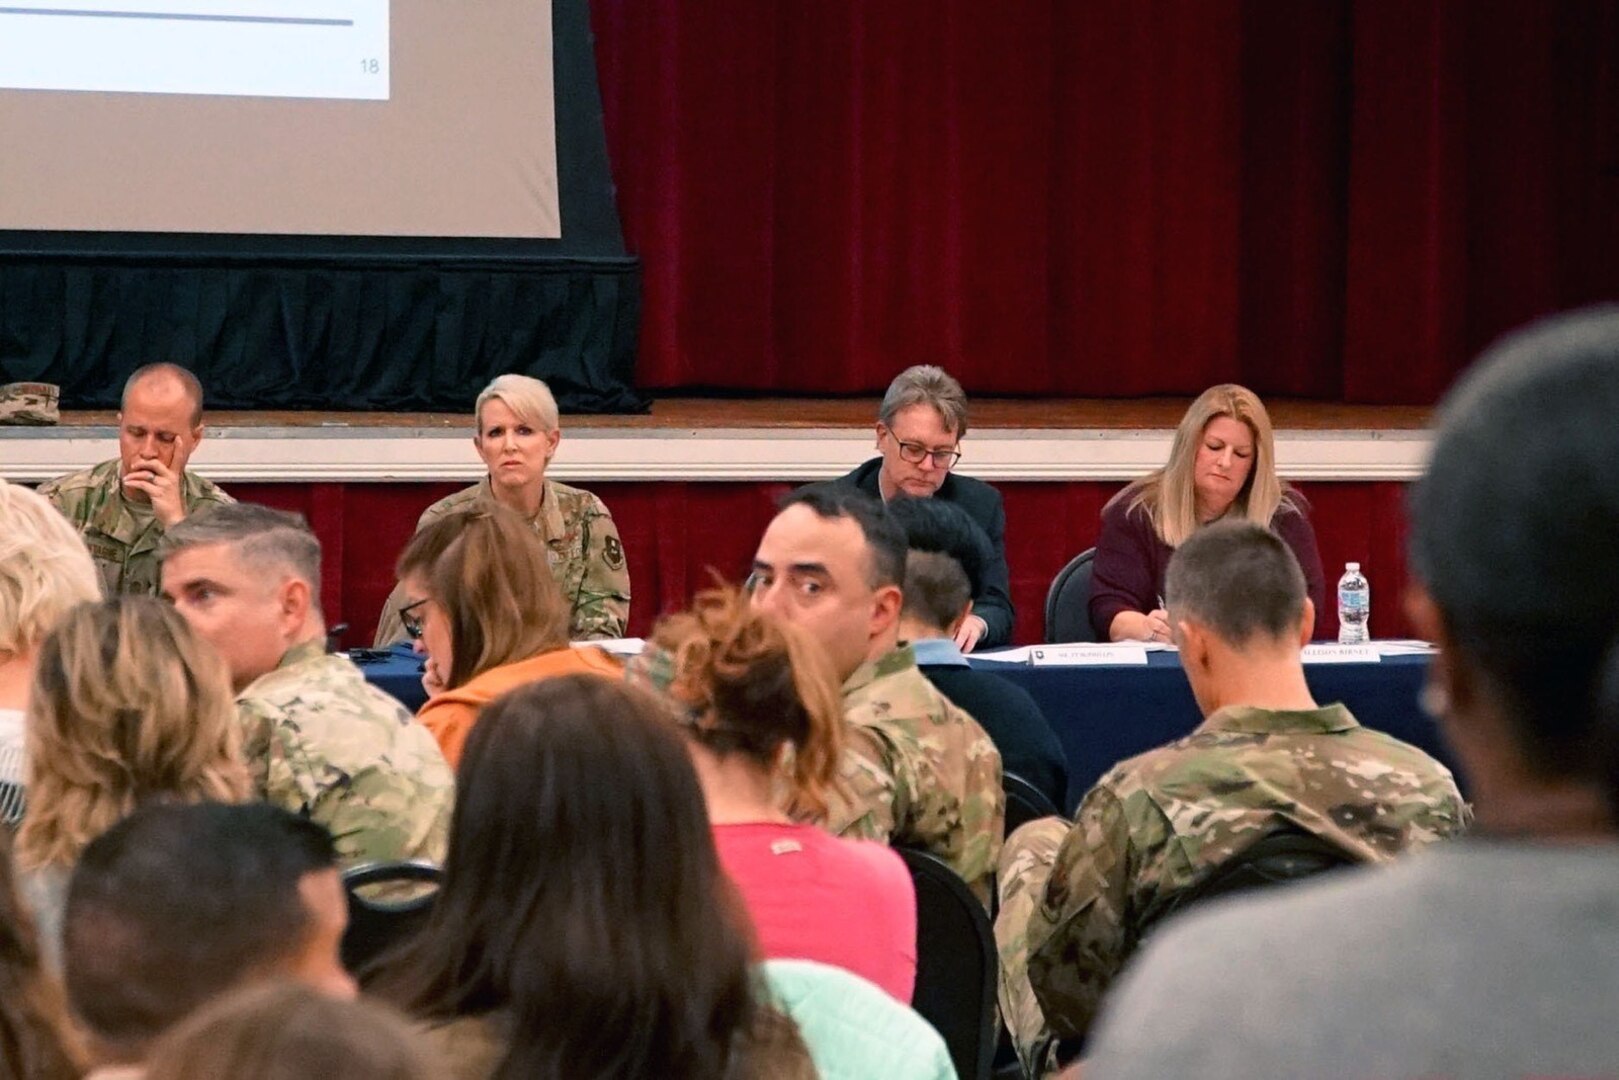 Brig. Gen. Laura Lenderman, 502d Air Base Wing and Joint Base San Antonio commander, and her leadership team, host a housing town hall Dec. 12, 2019 at the Fleenor Auditorium, JBSA-Randolph. These town halls here implemented to listen to concerns and update residents on the ongoing measures being taken to ensure safe and healthy homes at JBSA.